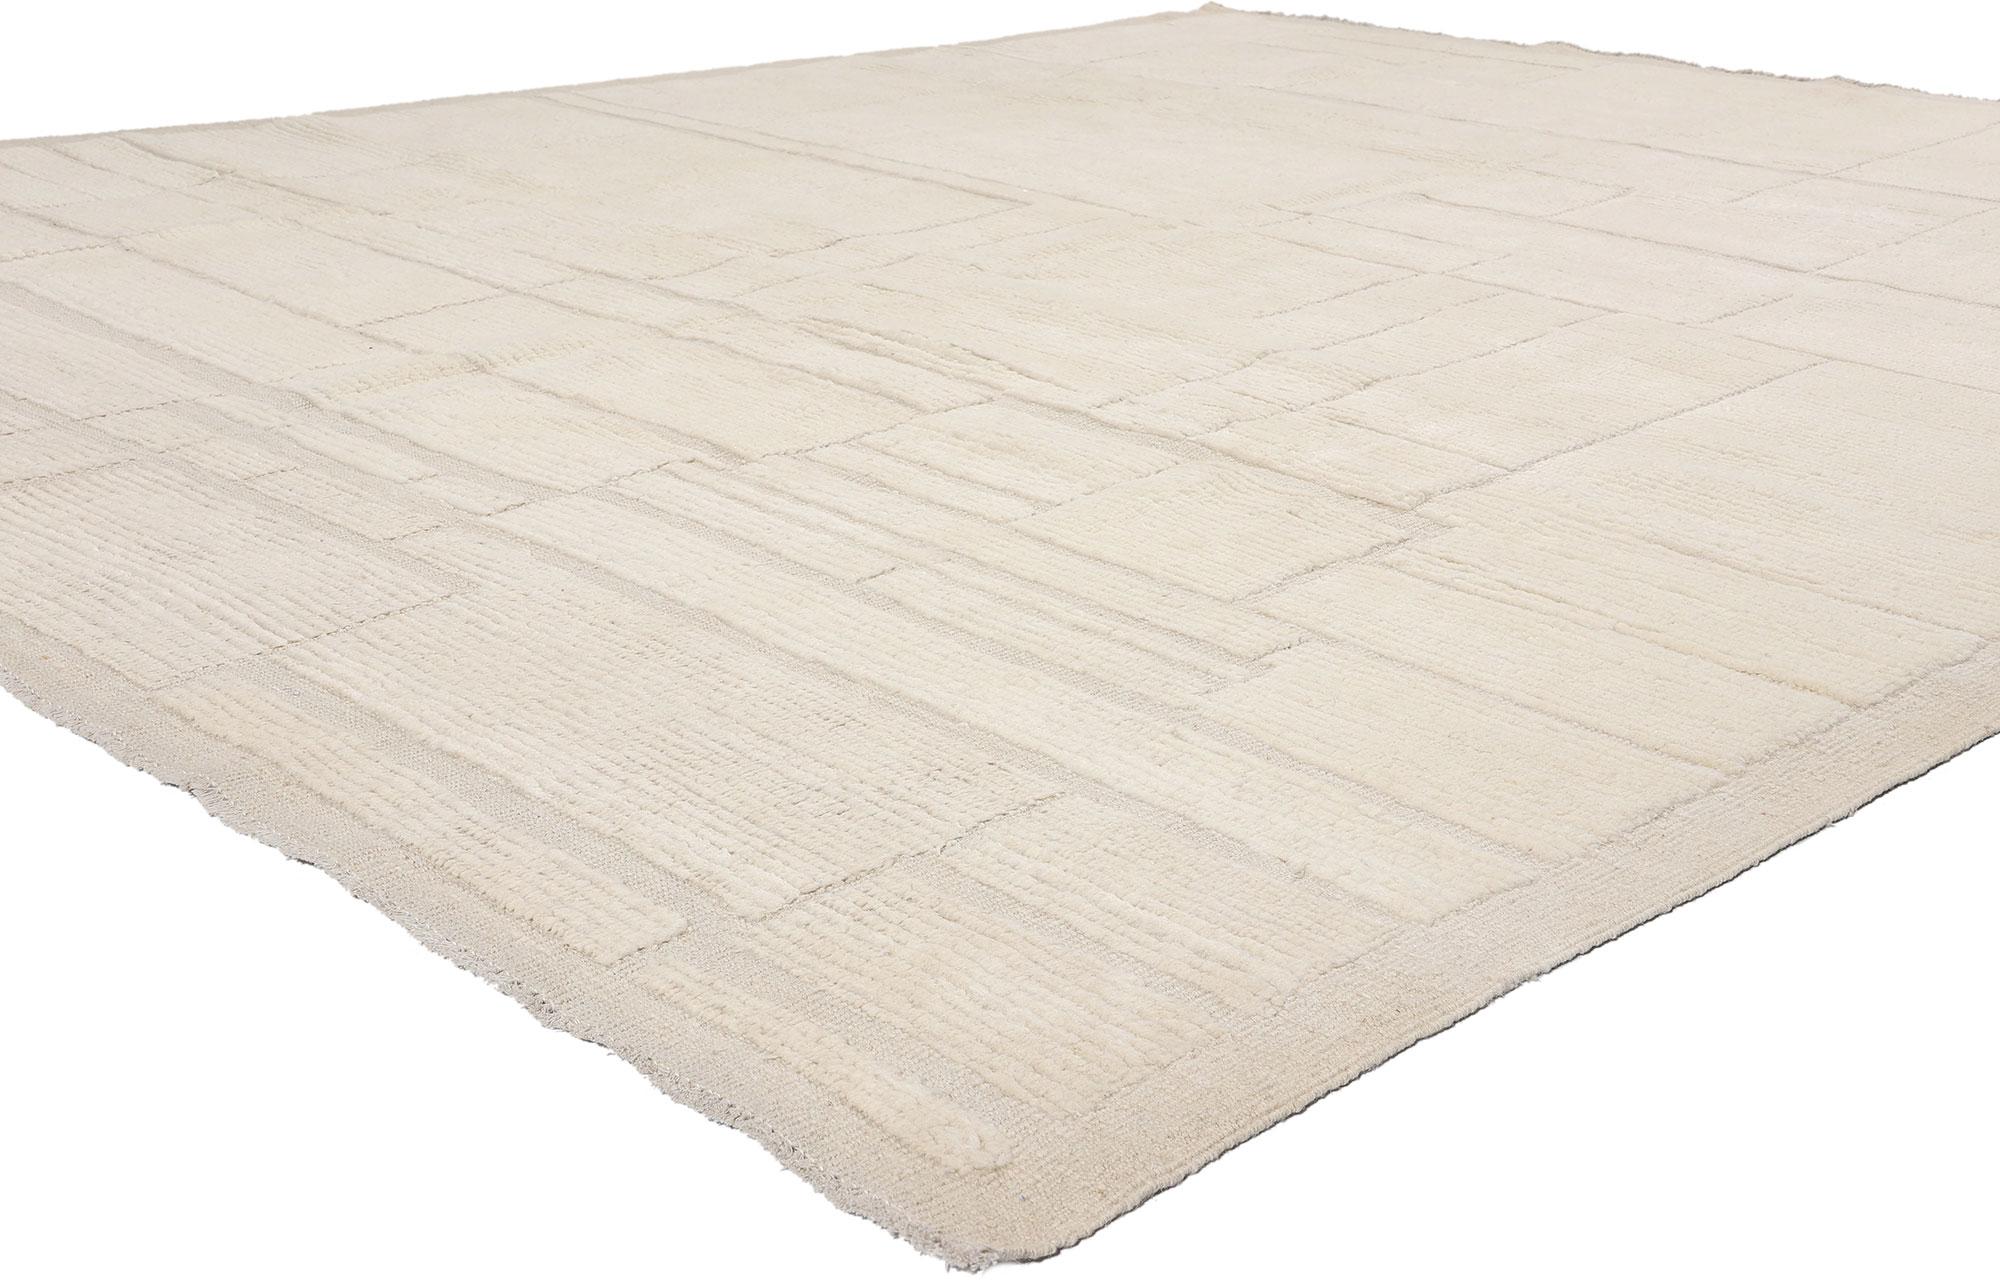 81104 Organic Modern Ivory Moroccan High-Low Rug, 08'02 x 10'01. Elevate your space with the captivating fusion of minimalist simplicity and Brutalist ruggedness embodied in hand knotted wool organic modern ivory Moroccan high-low rug. Crafted with